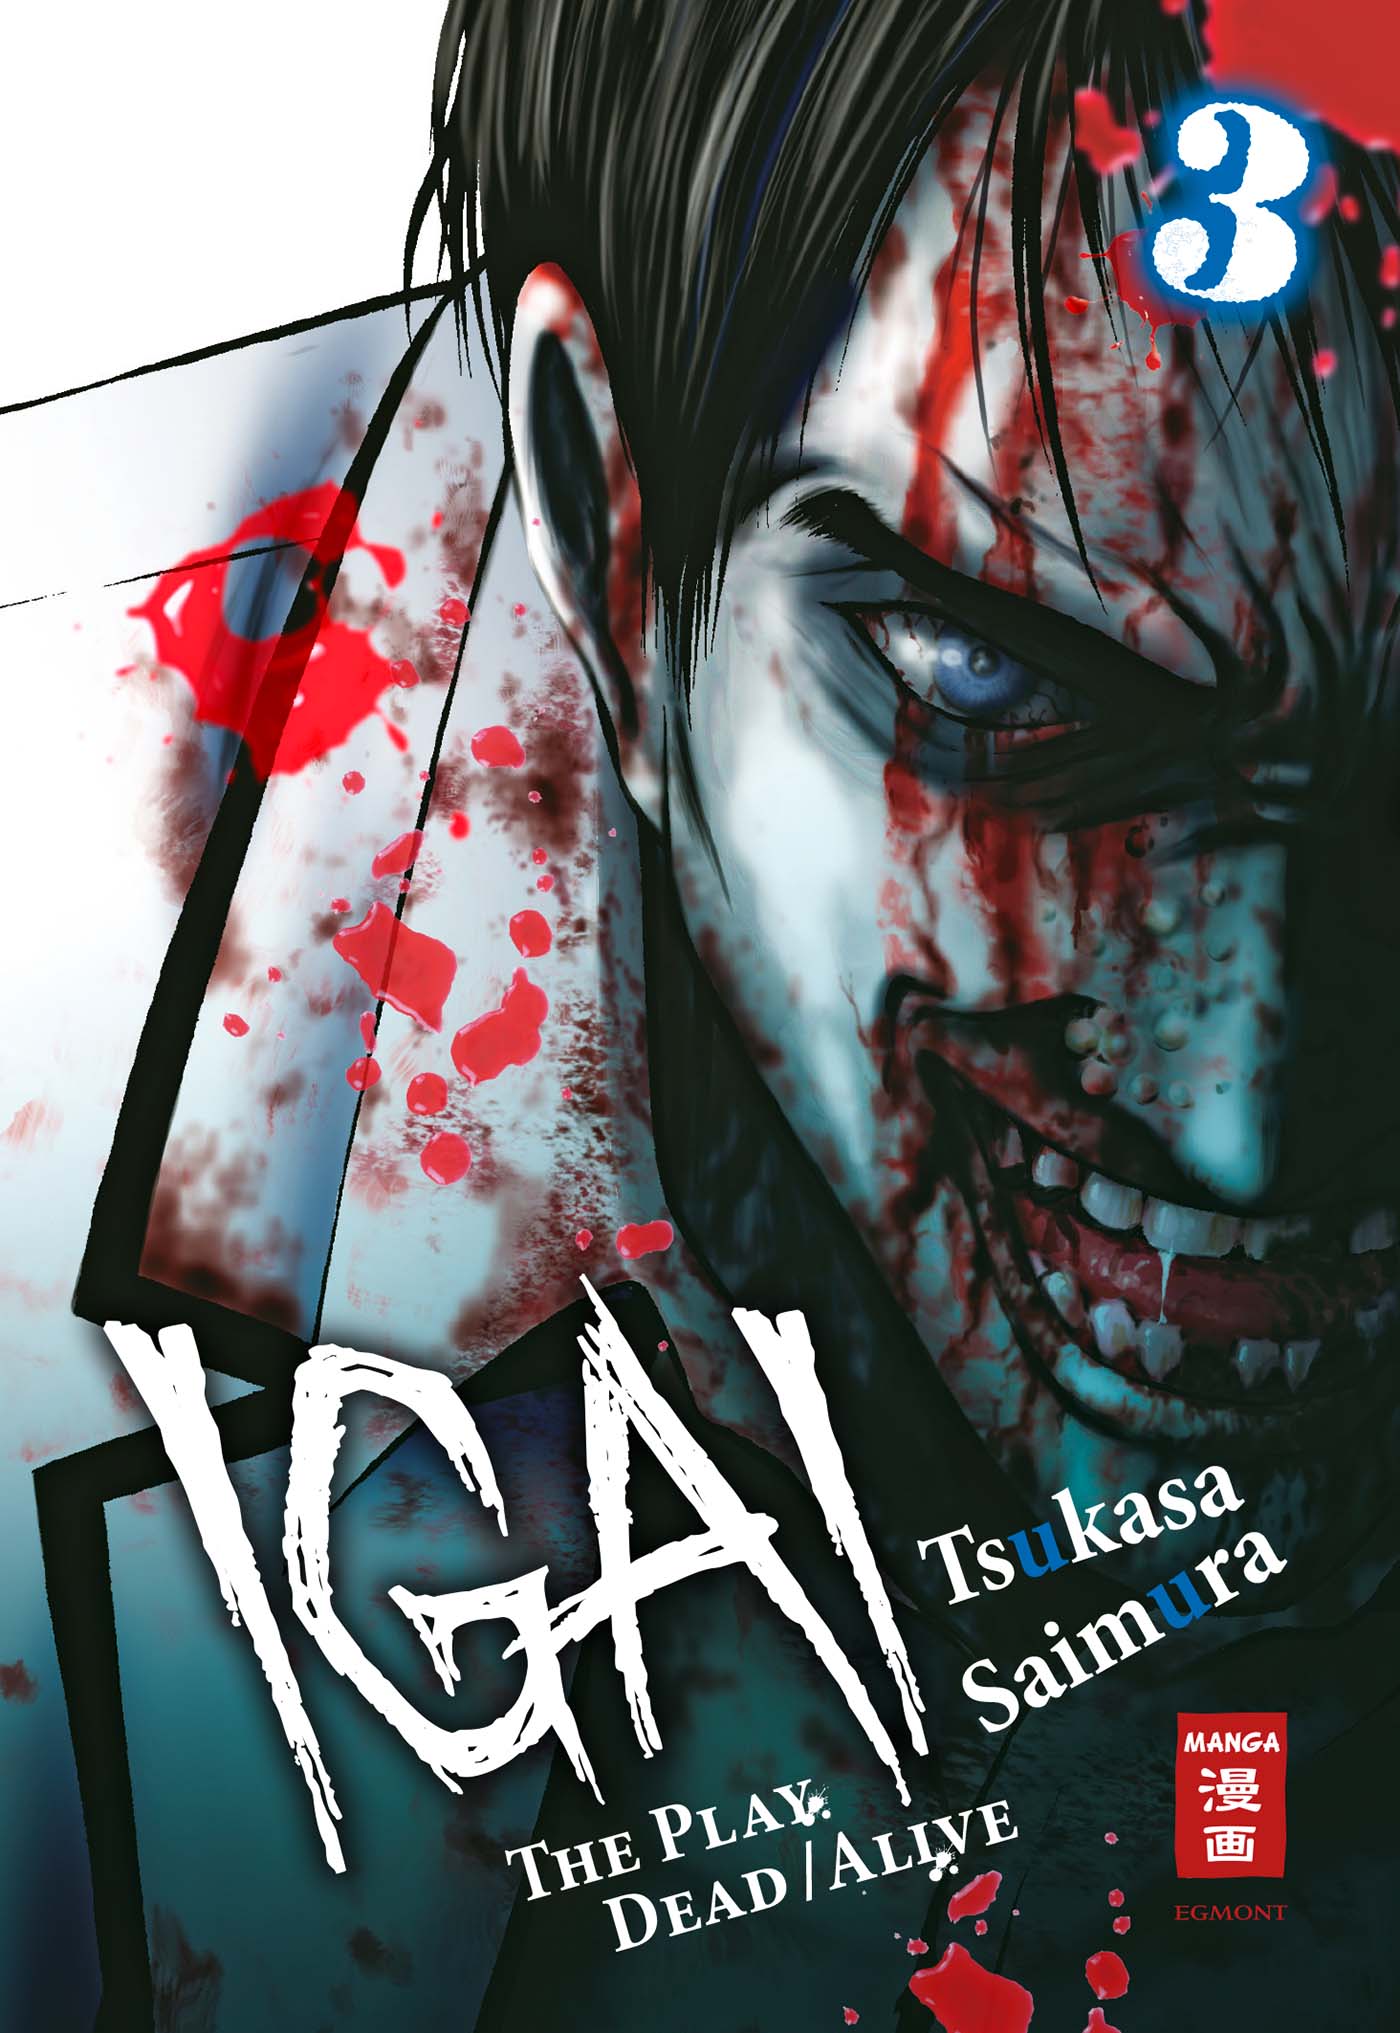  Igai - The Play Dead/Alive